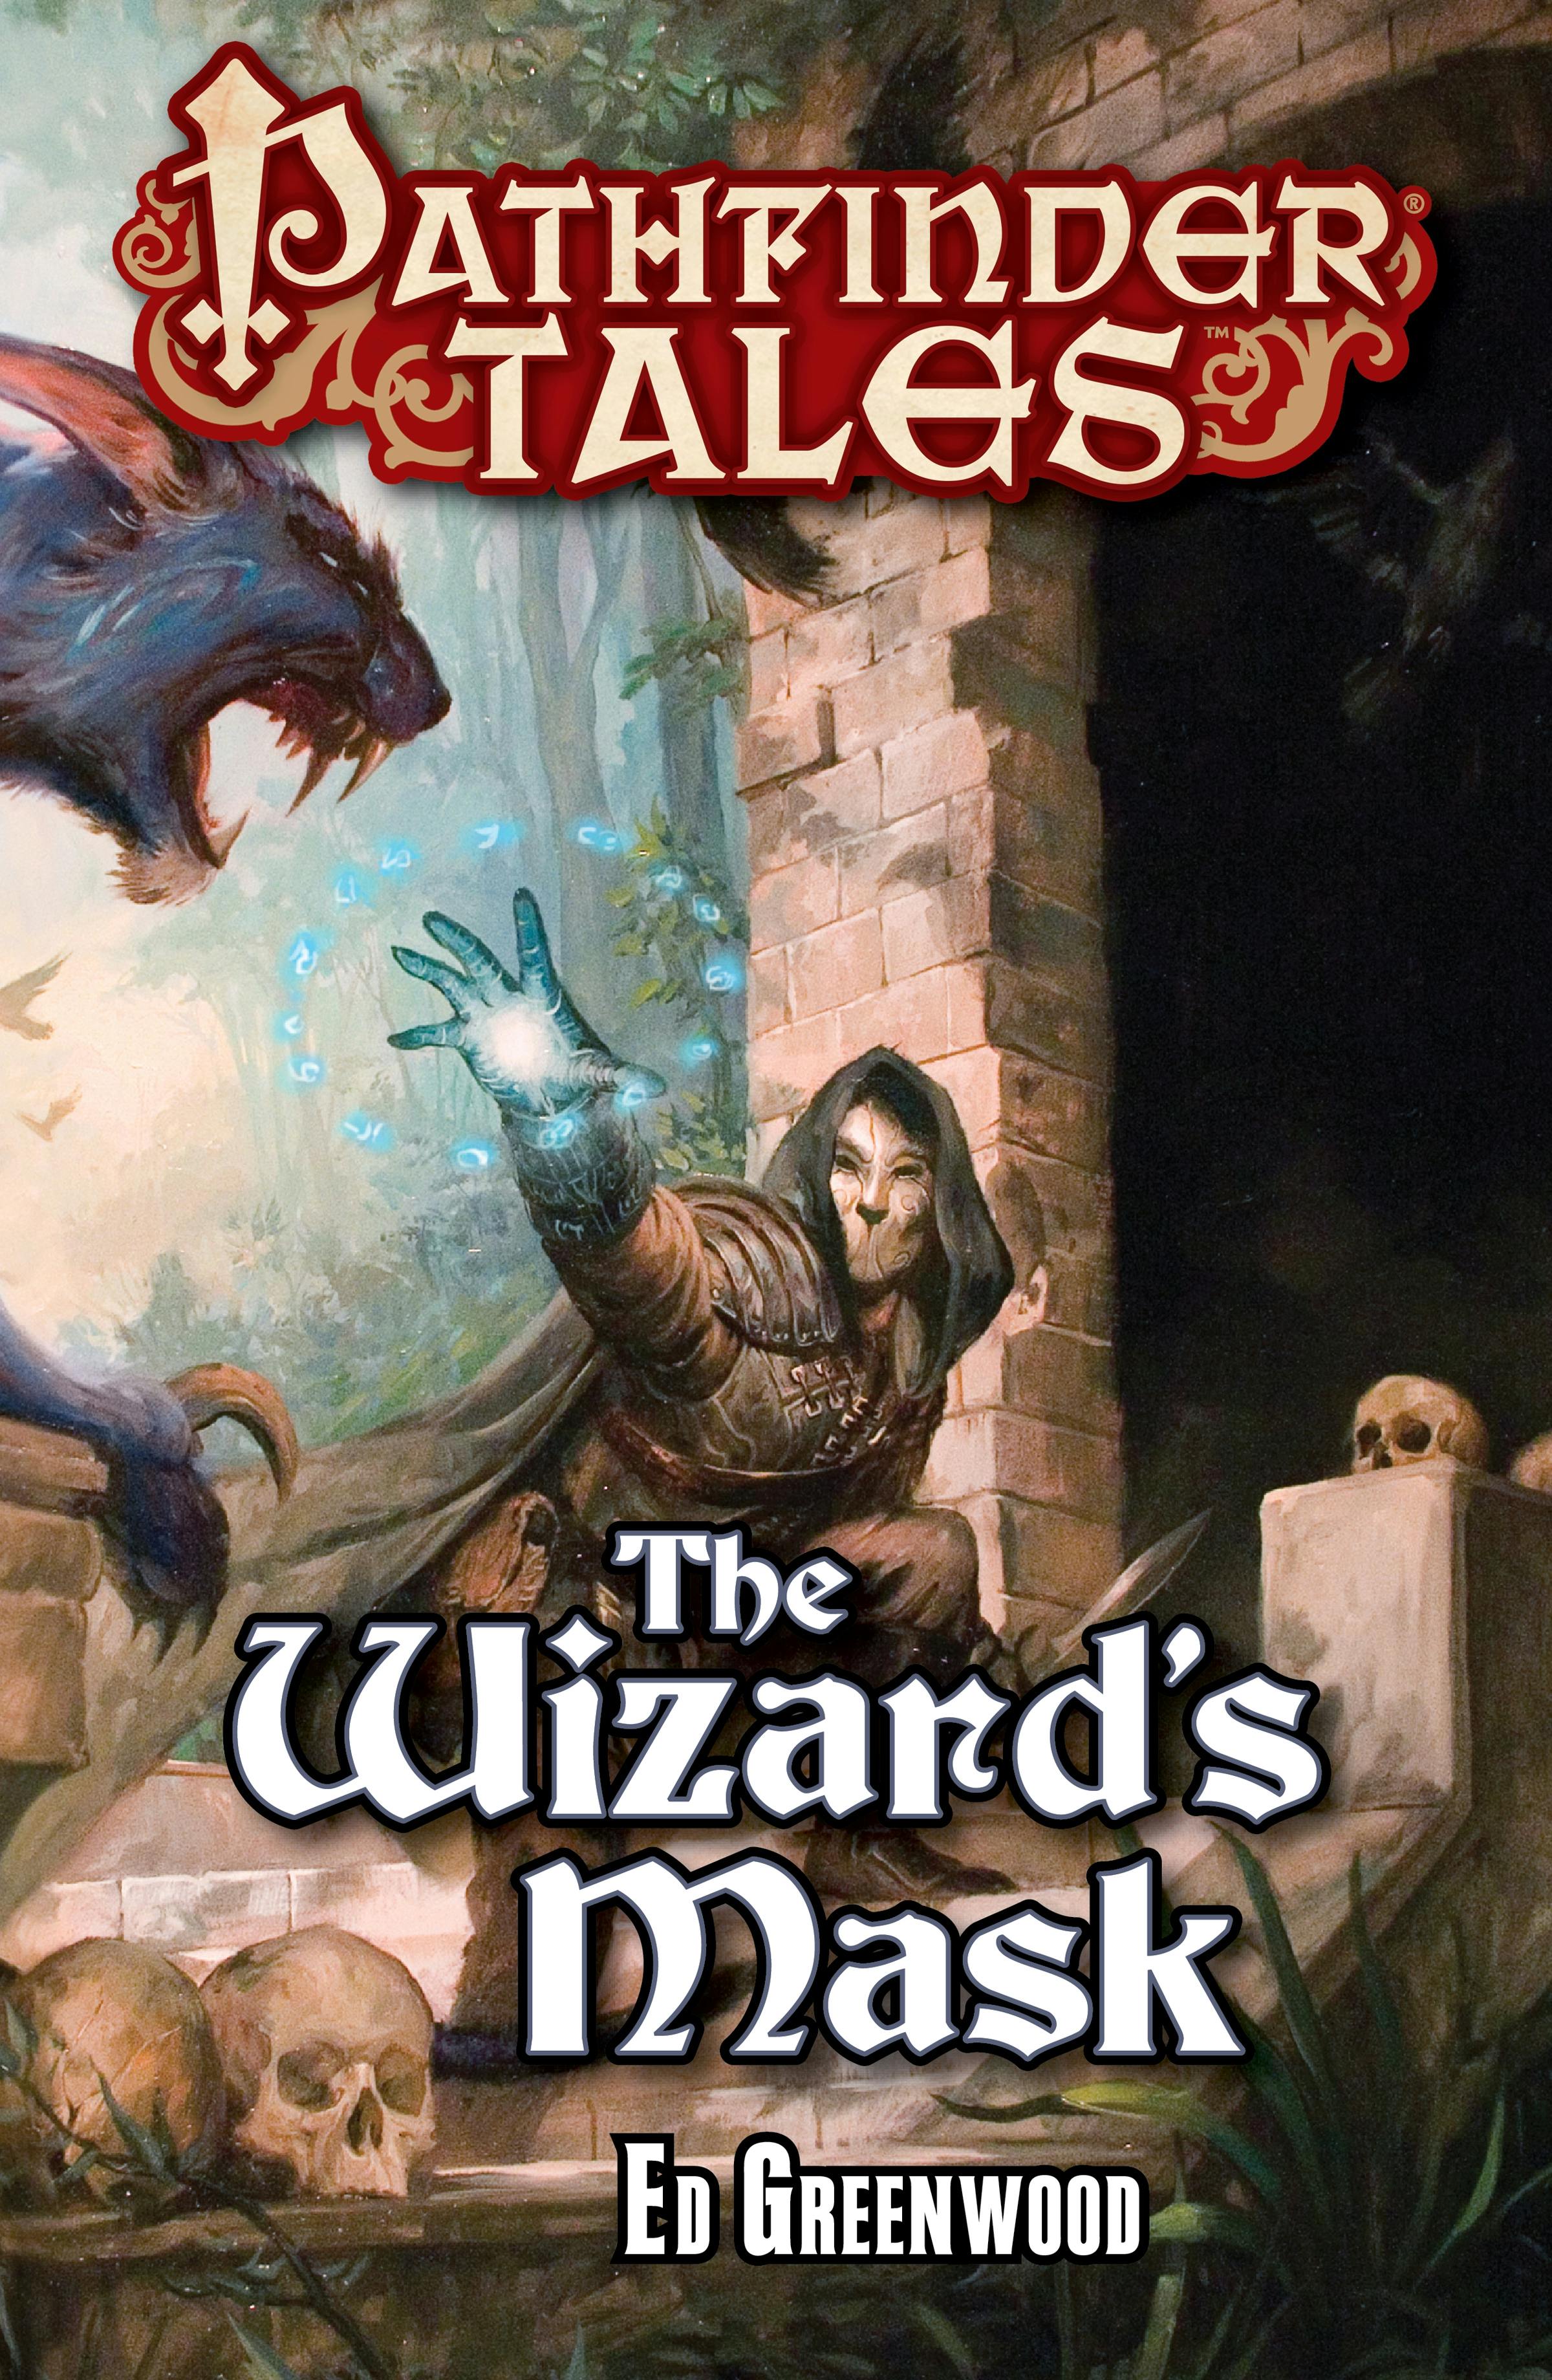 Cover for the book titled as: Pathfinder Tales: The Wizard's Mask